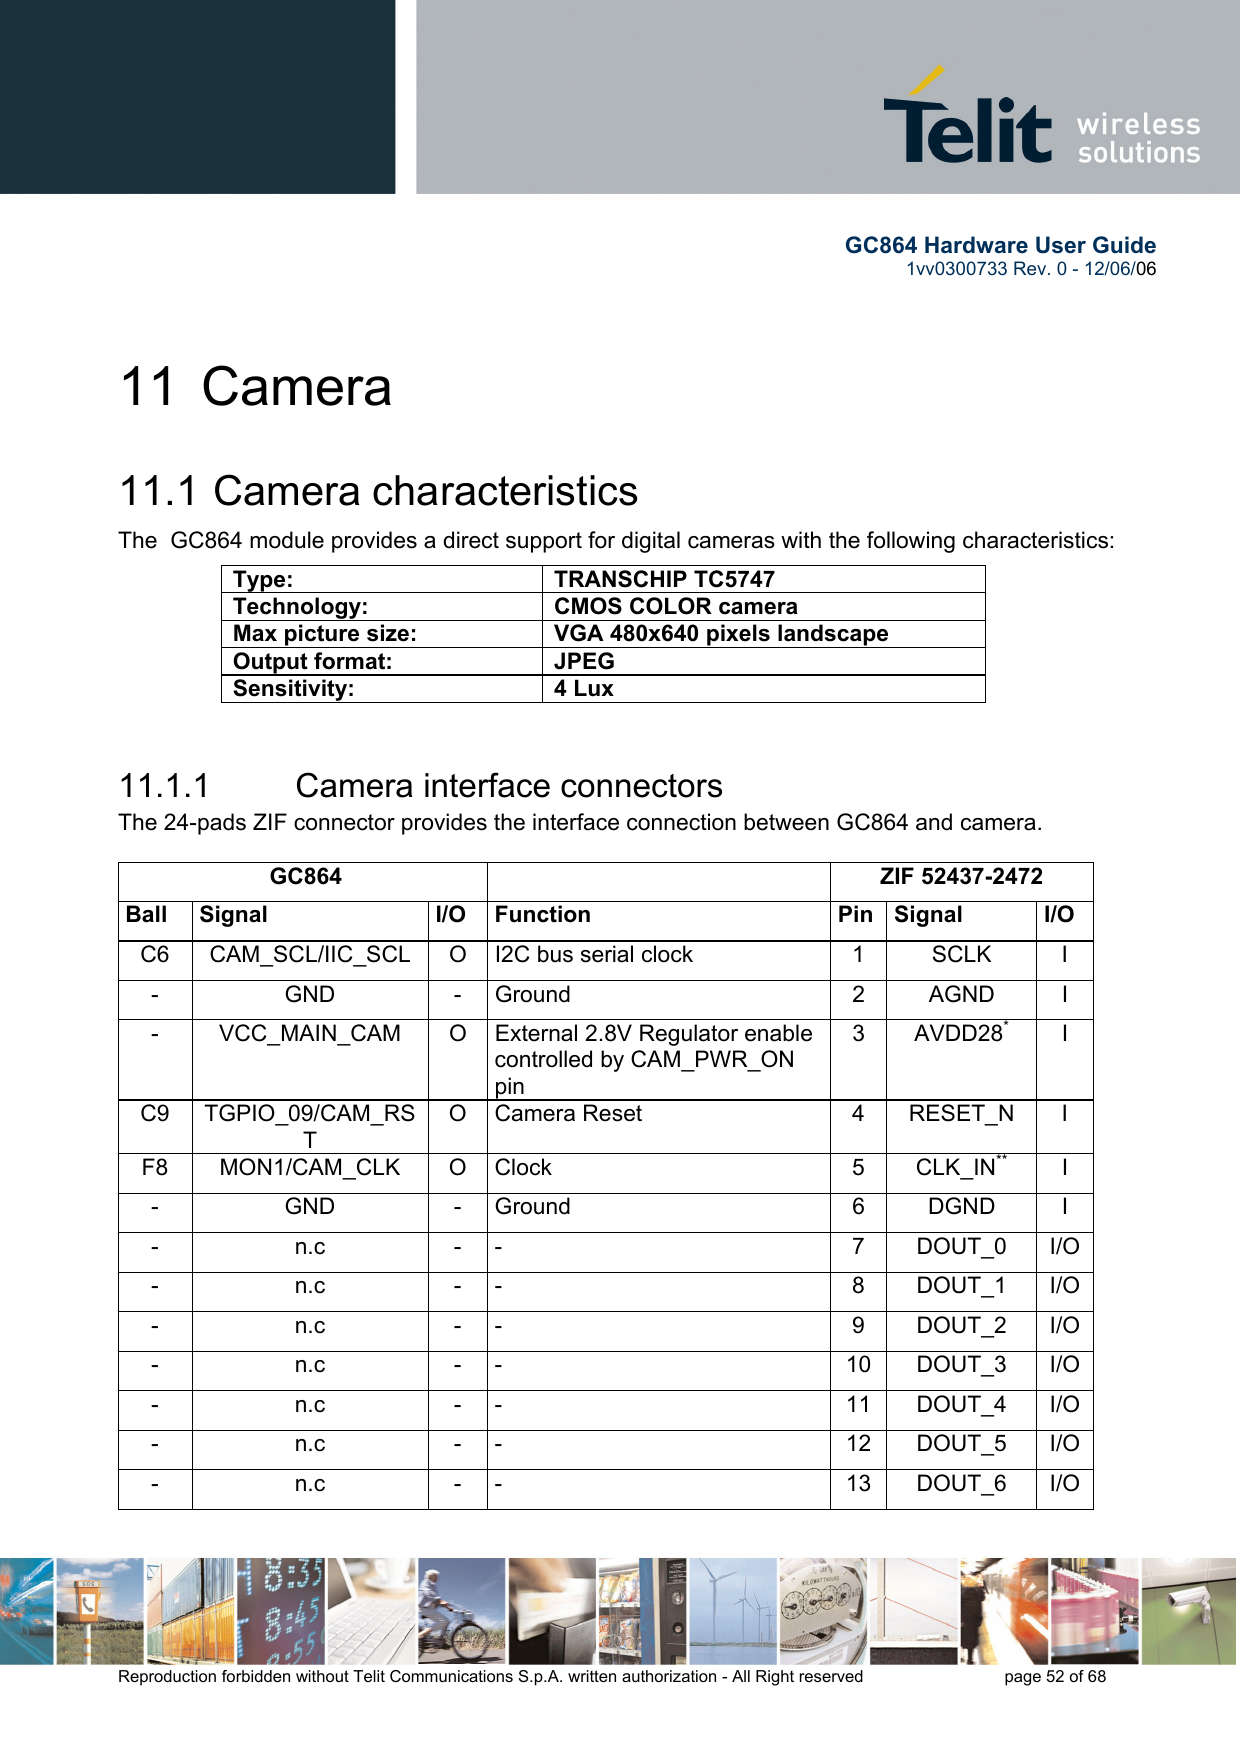        GC864 Hardware User Guide  1vv0300733 Rev. 0 - 12/06/06  Reproduction forbidden without Telit Communications S.p.A. written authorization - All Right reserved    page 52 of 68  11 Camera 11.1  Camera characteristics The  GC864 module provides a direct support for digital cameras with the following characteristics:  11.1.1  Camera interface connectors The 24-pads ZIF connector provides the interface connection between GC864 and camera.   GC864   ZIF 52437-2472 Ball Signal  I/O Function  Pin Signal  I/O C6  CAM_SCL/IIC_SCL  O  I2C bus serial clock  1  SCLK  I - GND - Ground  2 AGND I -  VCC_MAIN_CAM  O  External 2.8V Regulator enable controlled by CAM_PWR_ON pin 3 AVDD28* I C9 TGPIO_09/CAM_RST O Camera Reset  4  RESET_N  I F8 MON1/CAM_CLK O Clock  5 CLK_IN** I - GND - Ground  6 DGND I - n.c - -  7 DOUT_0 I/O- n.c - -  8 DOUT_1  I/O- n.c - -  9 DOUT_2 I/O- n.c - -  10 DOUT_3 I/O- n.c - -  11 DOUT_4 I/O- n.c - -  12 DOUT_5 I/O- n.c - -  13 DOUT_6 I/OType: TRANSCHIP TC5747 Technology:  CMOS COLOR camera Max picture size:  VGA 480x640 pixels landscape Output format:  JPEG Sensitivity: 4 Lux 